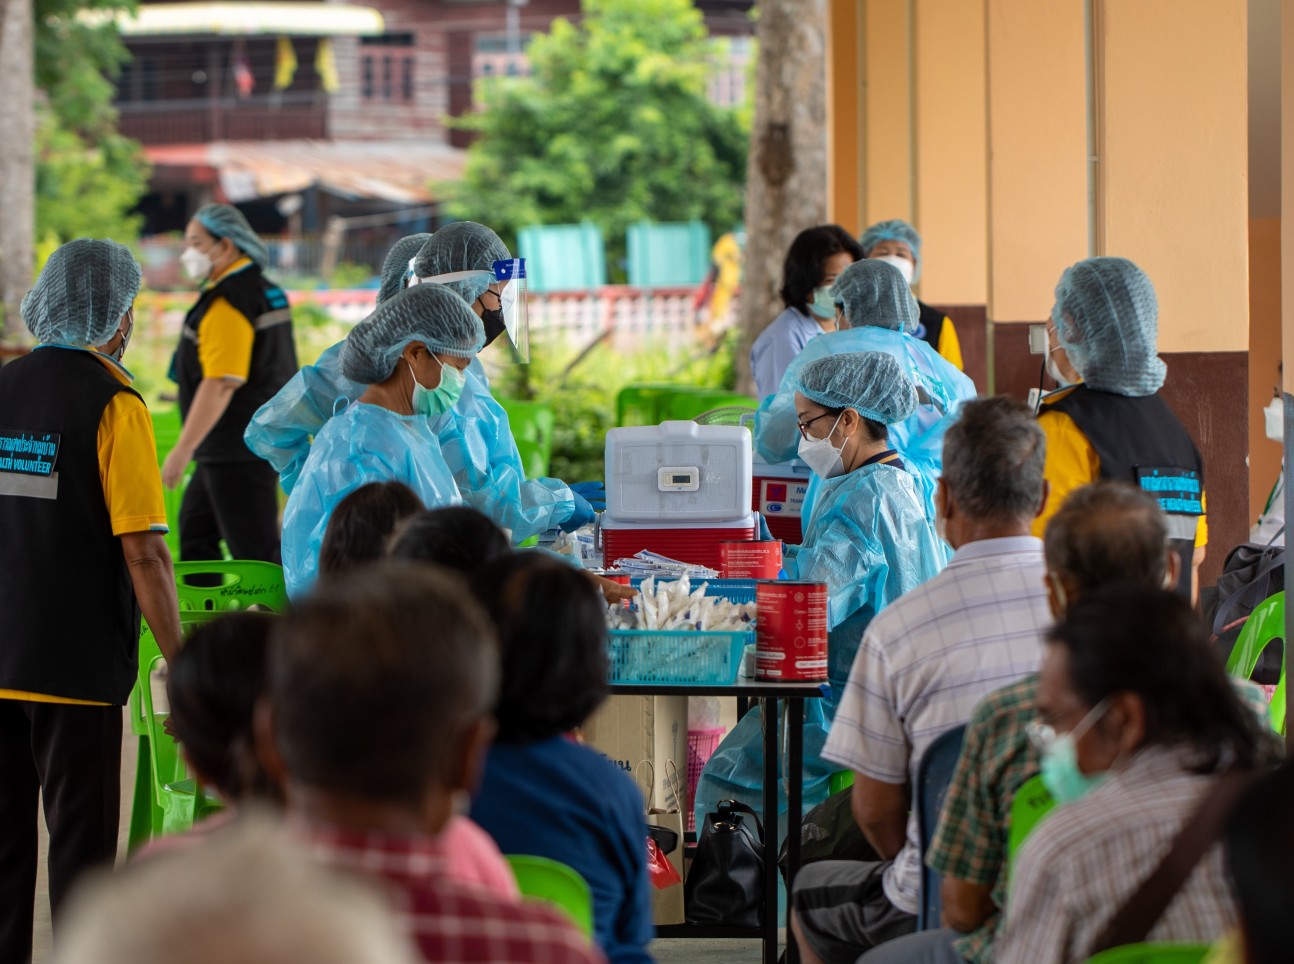 A team distributing vaccines in Thailand